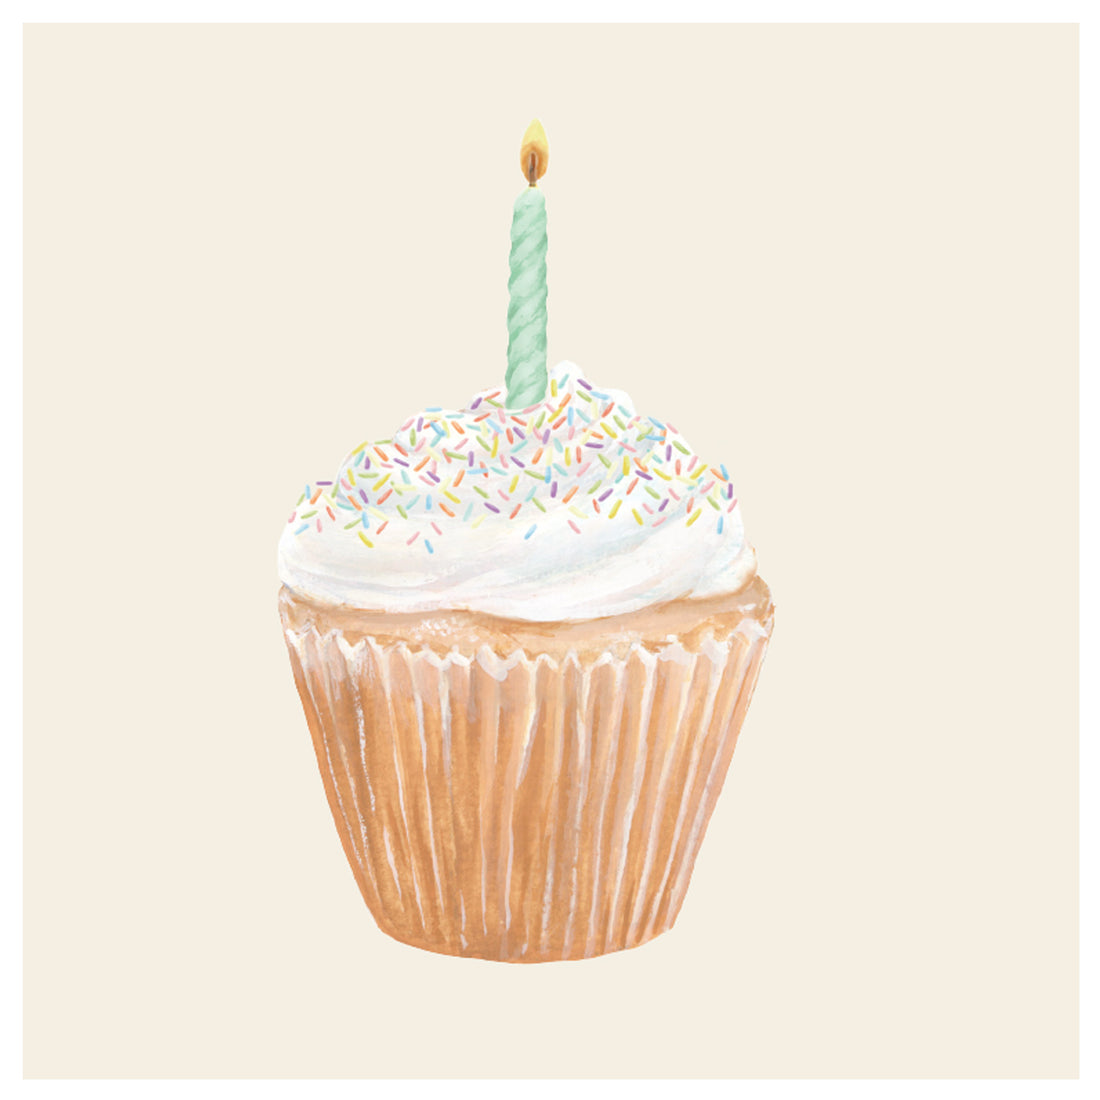 A festive illustration of a Birthday Cake &amp; Cupcake Napkins with a candle on it.